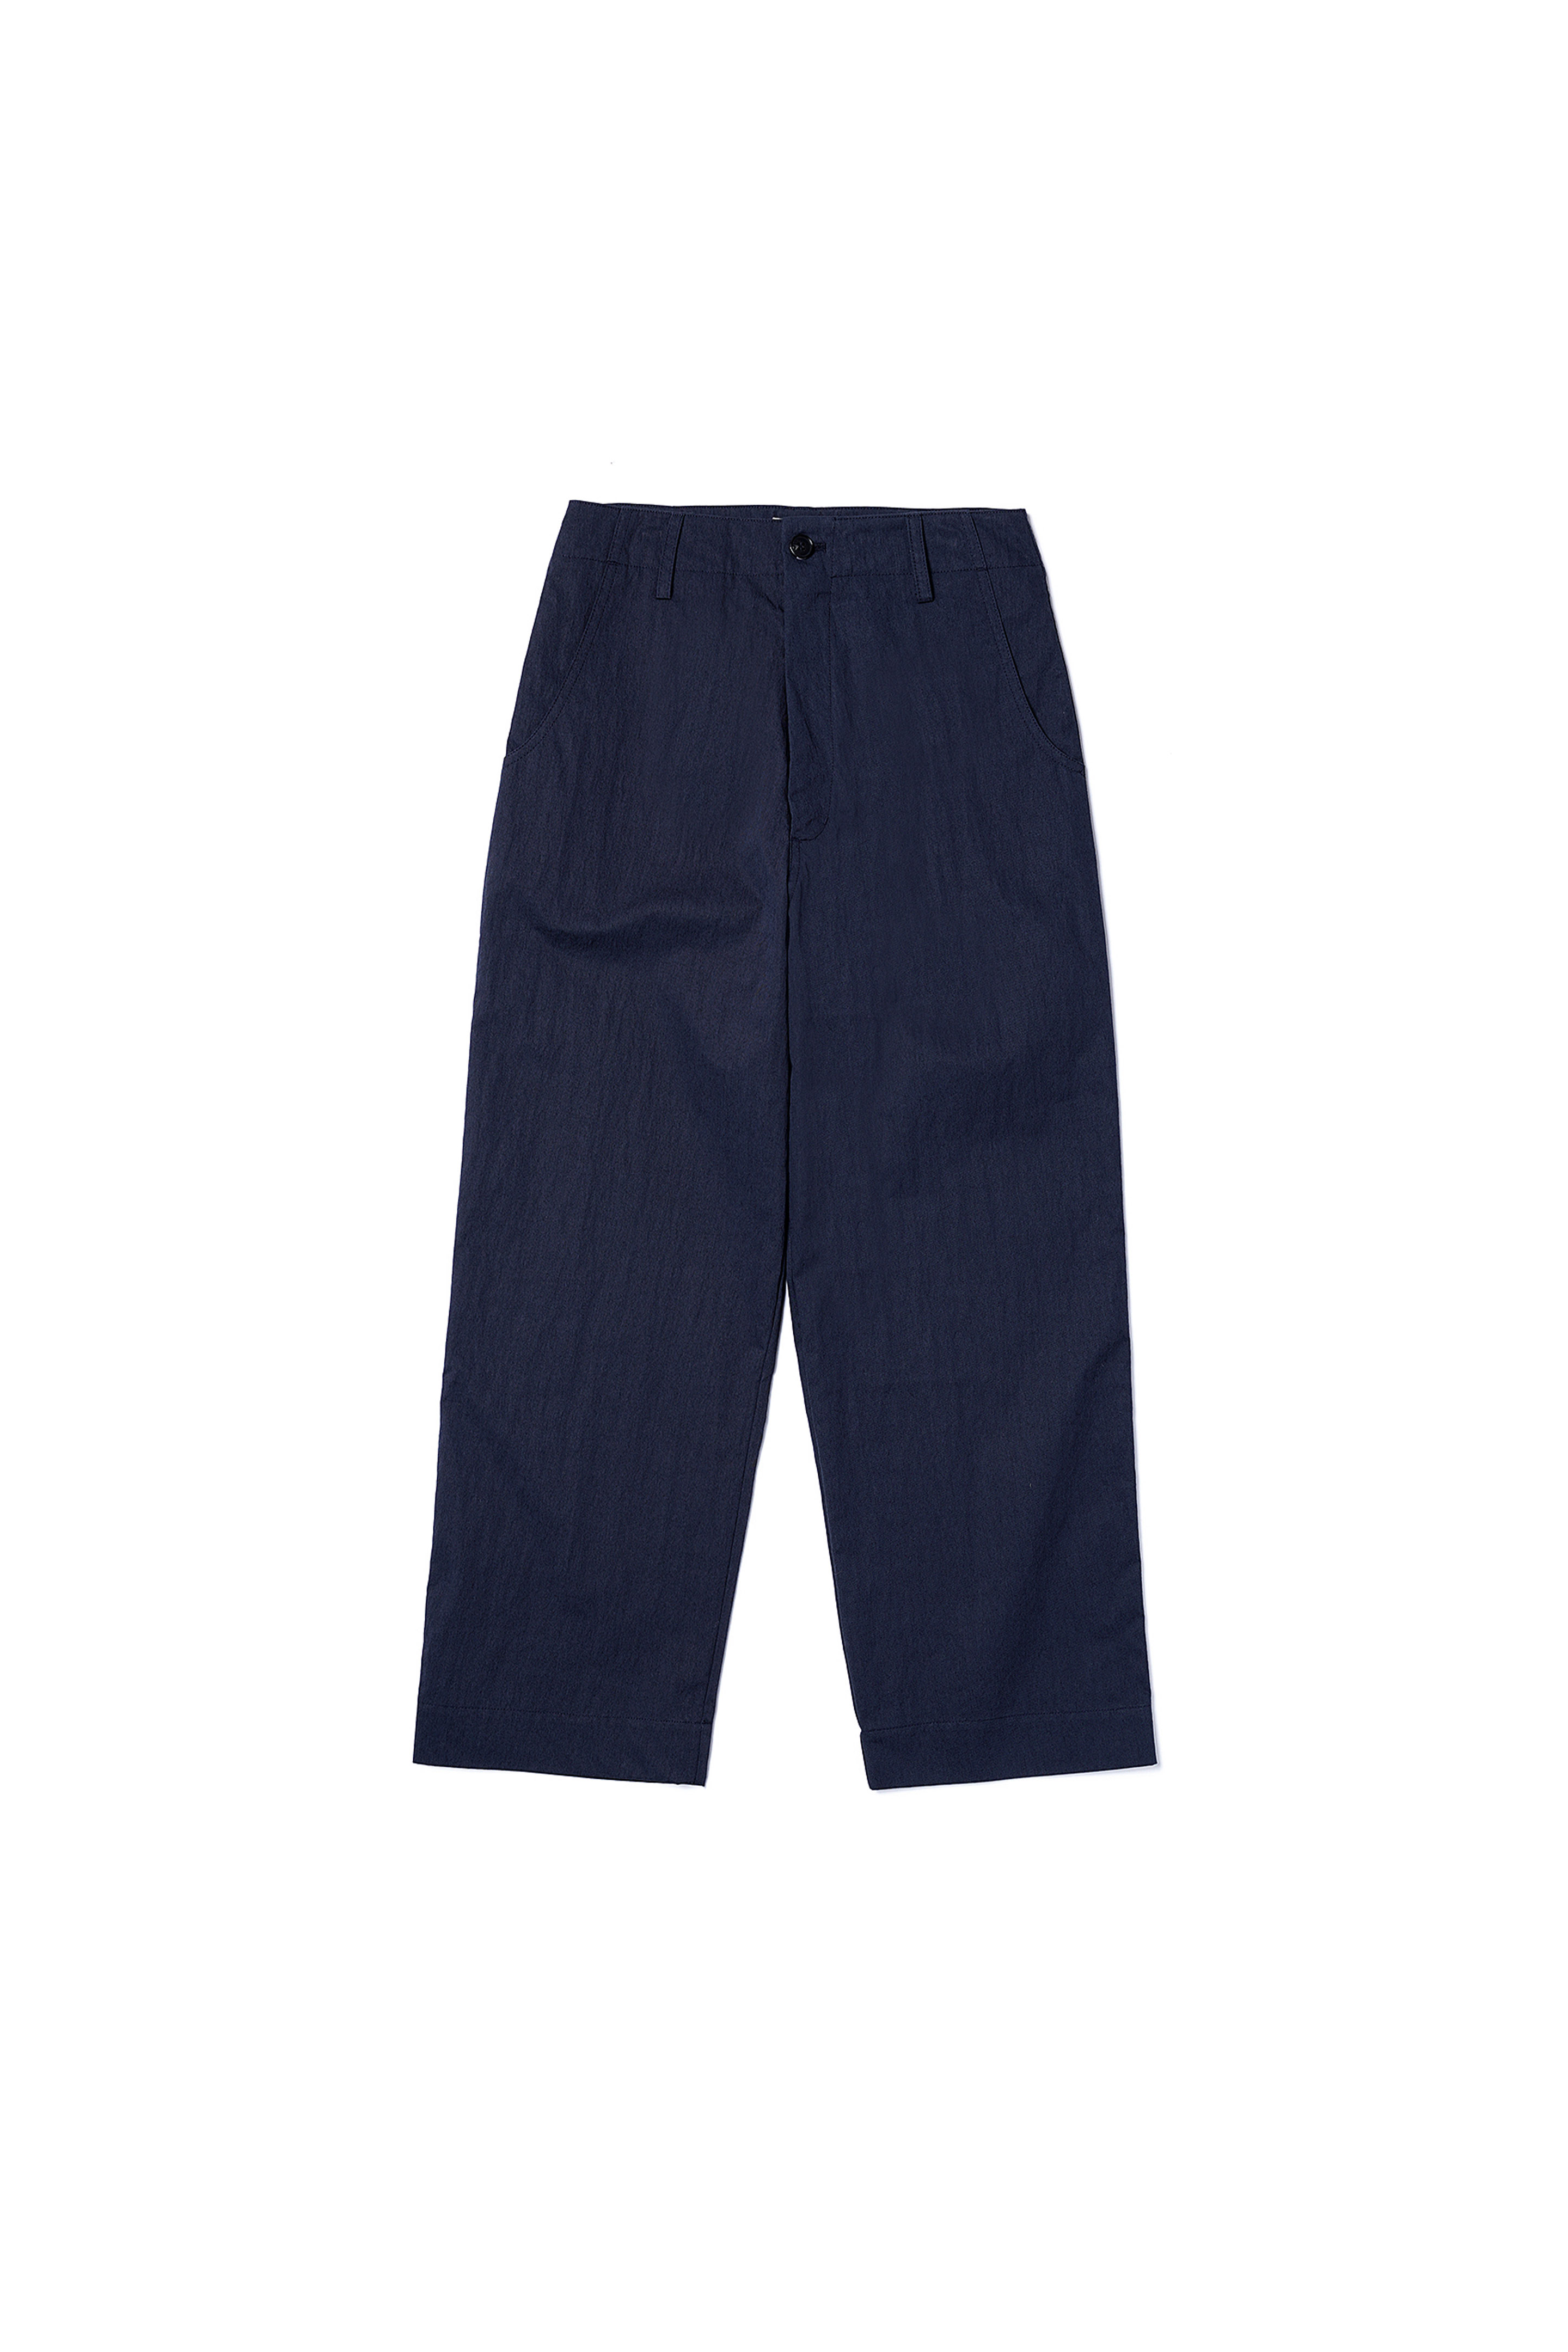 Towpath 003 Easy Cotton Pants (Navy)